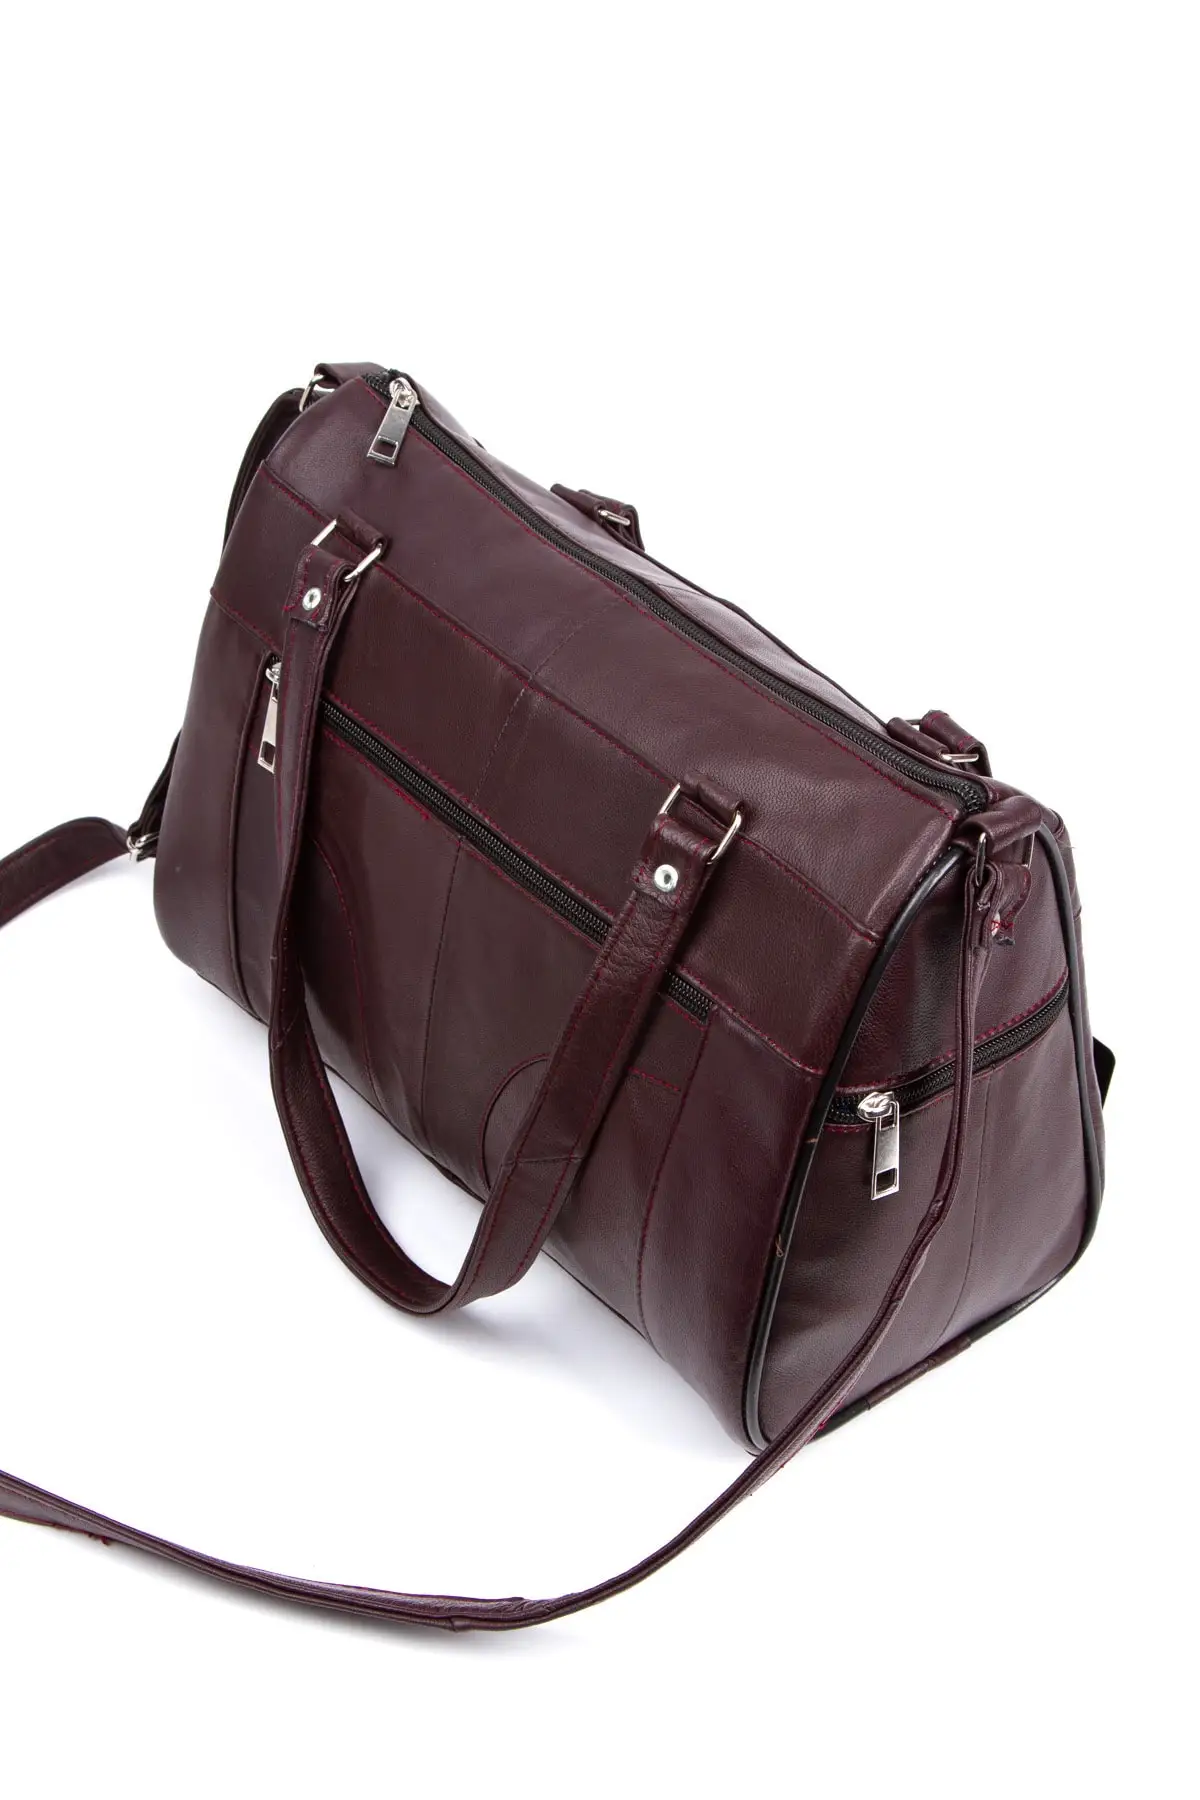 

Burgundy Genuine Leather Deluxe Multi-Compartment Women 'S Hand And Shoulder Bag Brand Casual For Women Bag Luxury Brand Handbag Fashion designer